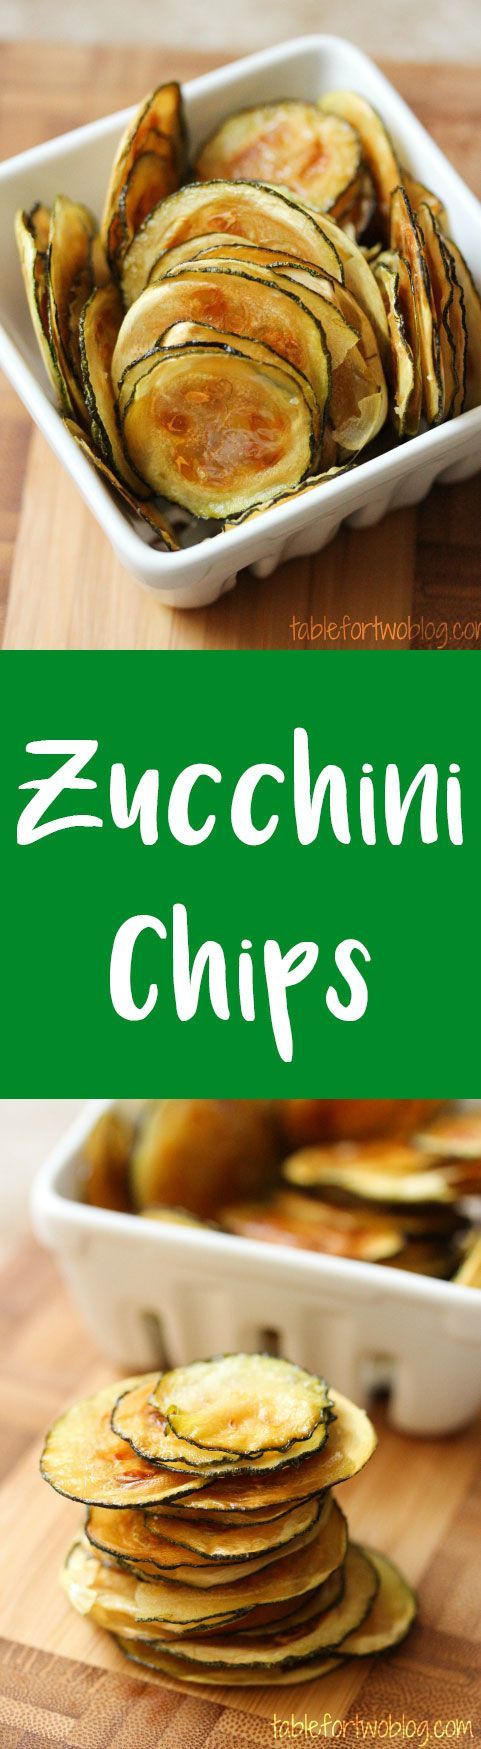 These zucchini chips are so light and crisp! The perfect snack!